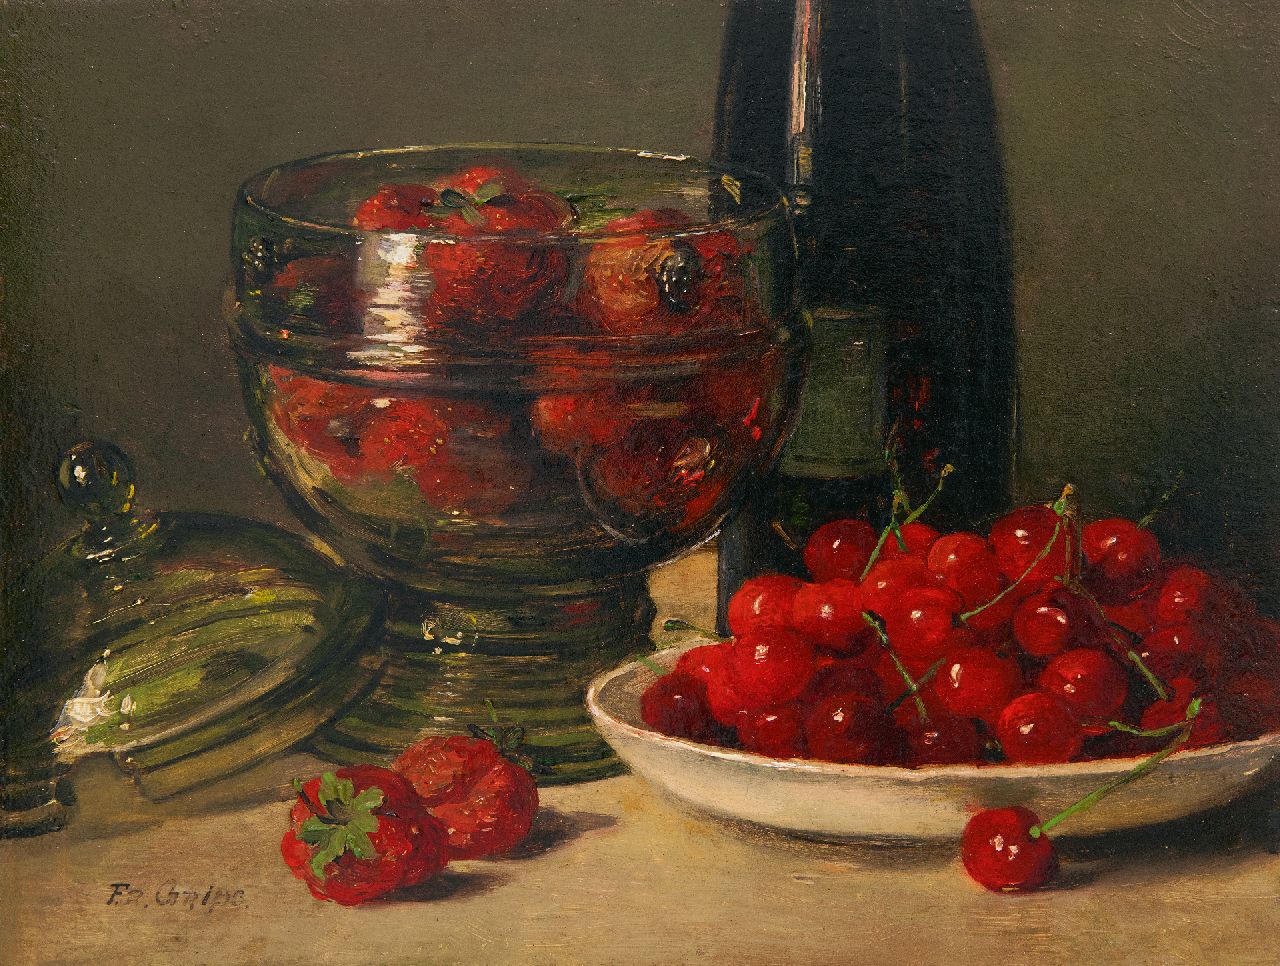 Grips F.  | Frédéric Antoine Marie 'Frits' Grips, Still life with cherries and strawberries in a glass jar, oil on panel 16.0 x 21.1 cm, signed l.l.